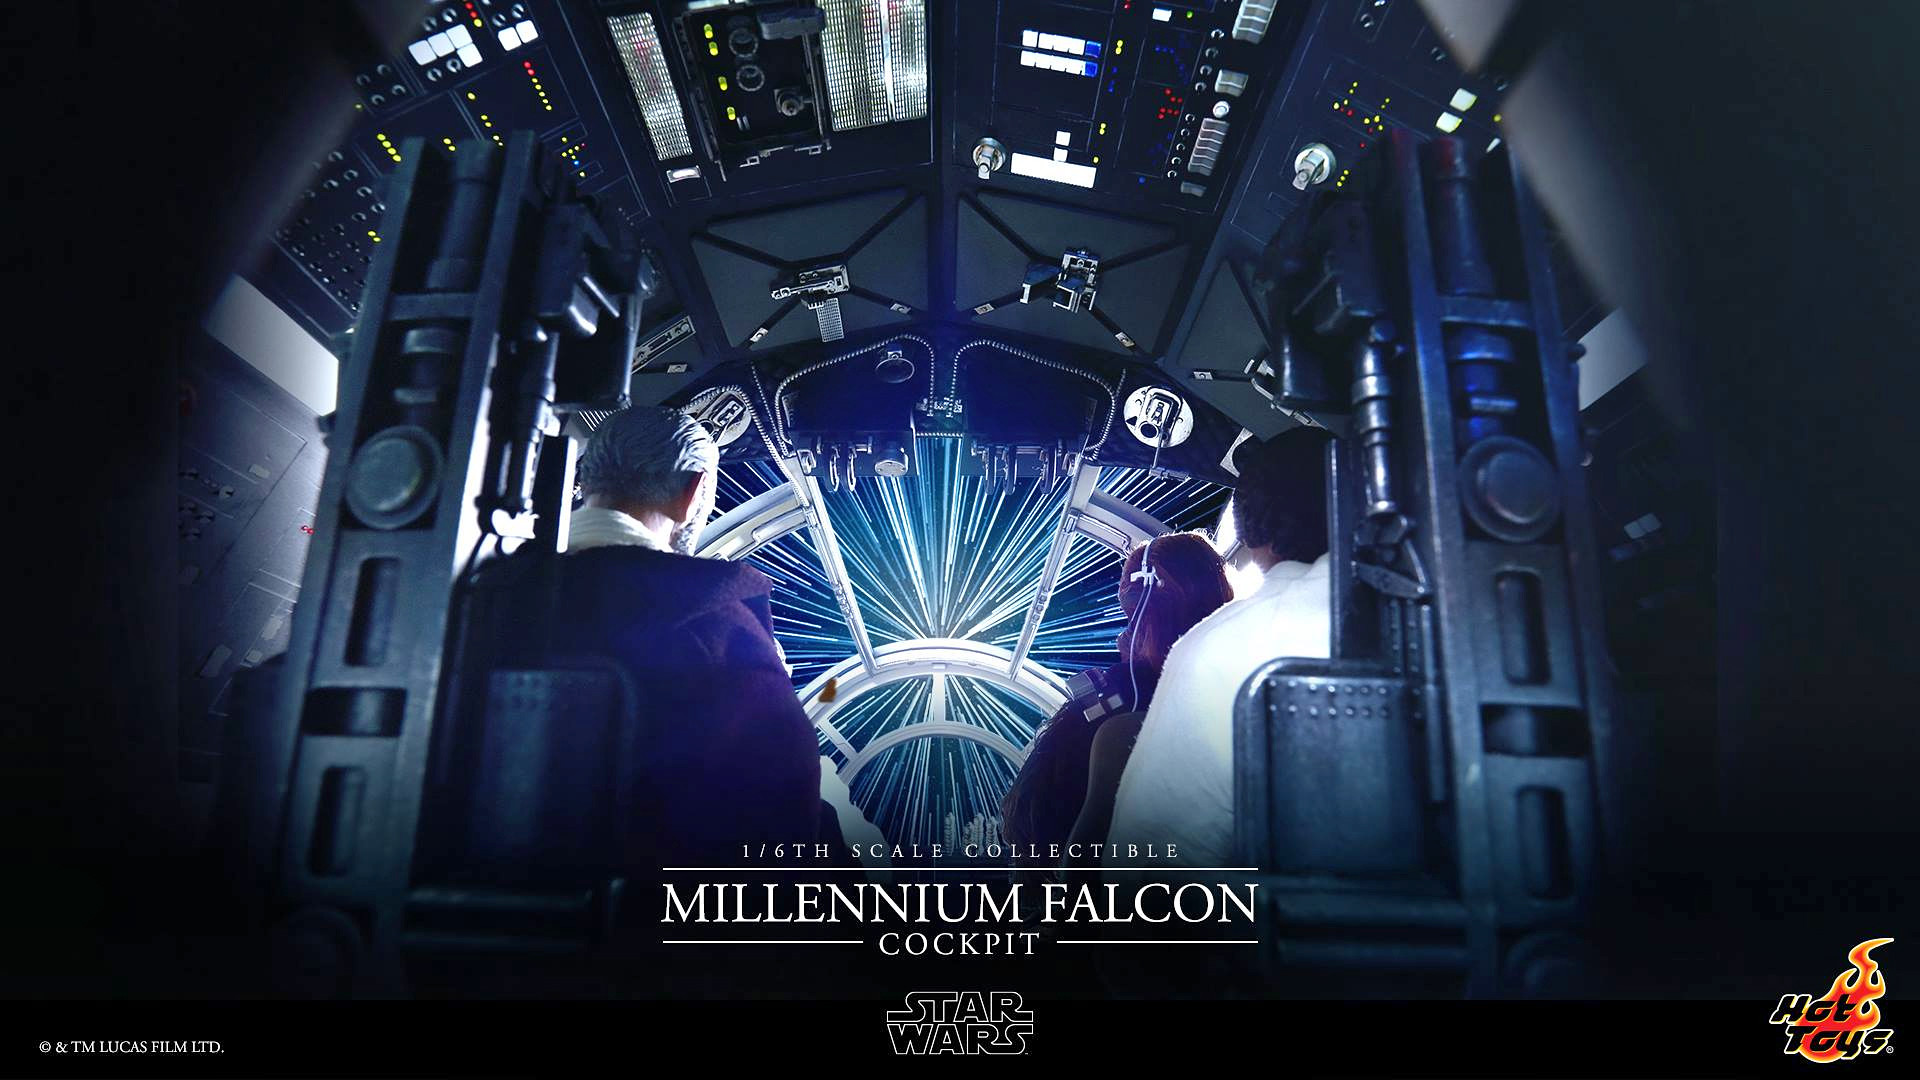 STAR WARS THE FORCE AWAKENS Millennium Falcon Images Worthy 16001119 Millenium Falcon Backgrounds